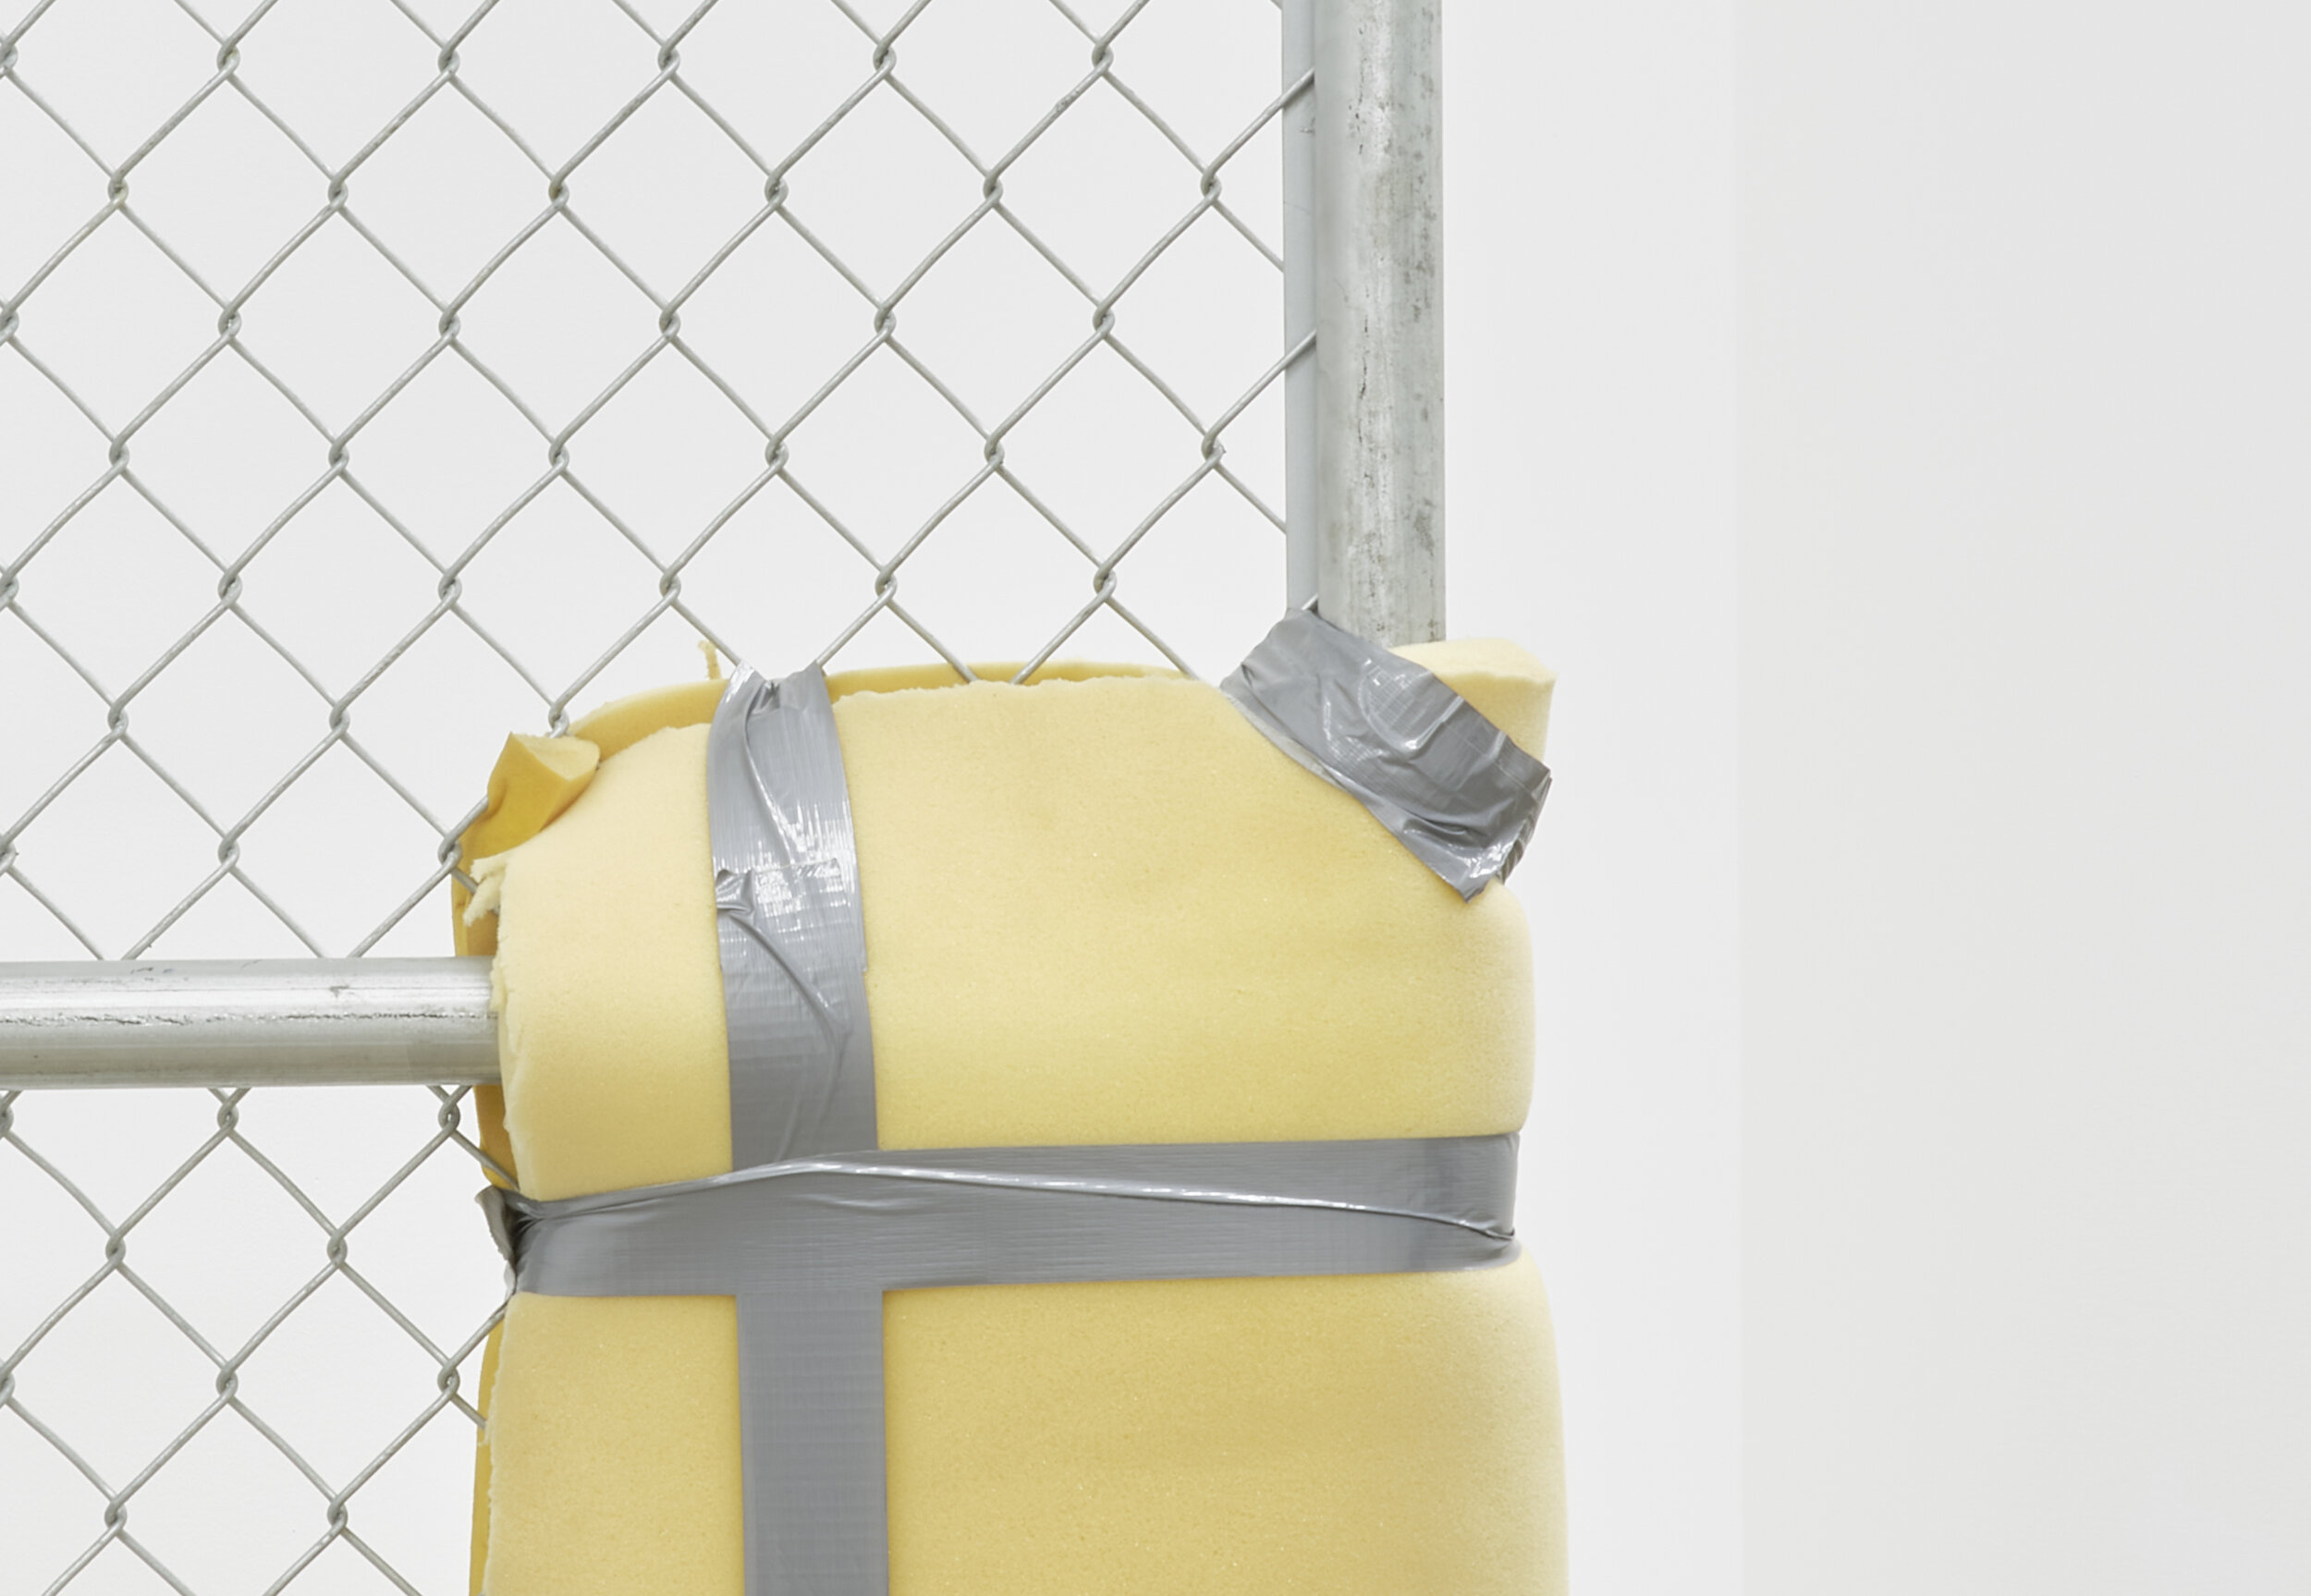  Bat-Ami Rivlin  Untitled (metal gate, yellow foam, duct tape) , 2019 (detail) chain link fencing, metal frame, hinges, polyisocyanurate foam, duct tape, hardware 84&nbsp;1⁄2&nbsp;x 5 x 24 inches (215 x 8 x 61 cm) BR3 